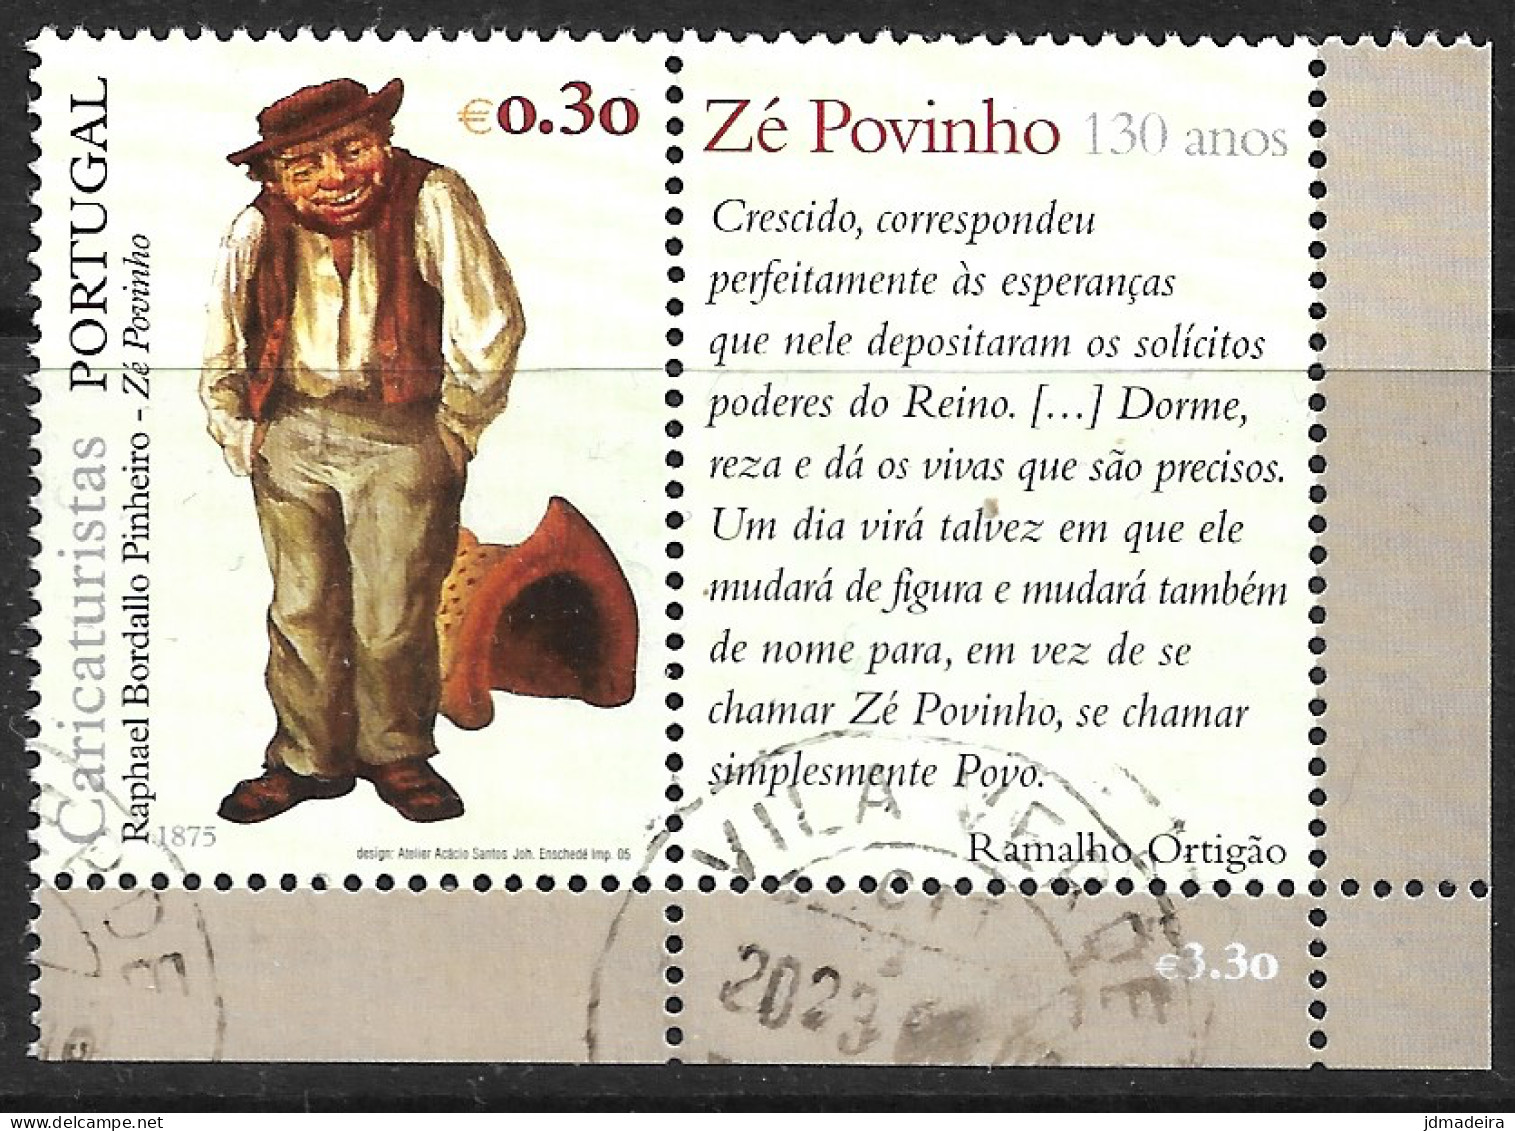 Portugal – 2005 Cartoons 0,30 Used Stamp With Label - Gebraucht